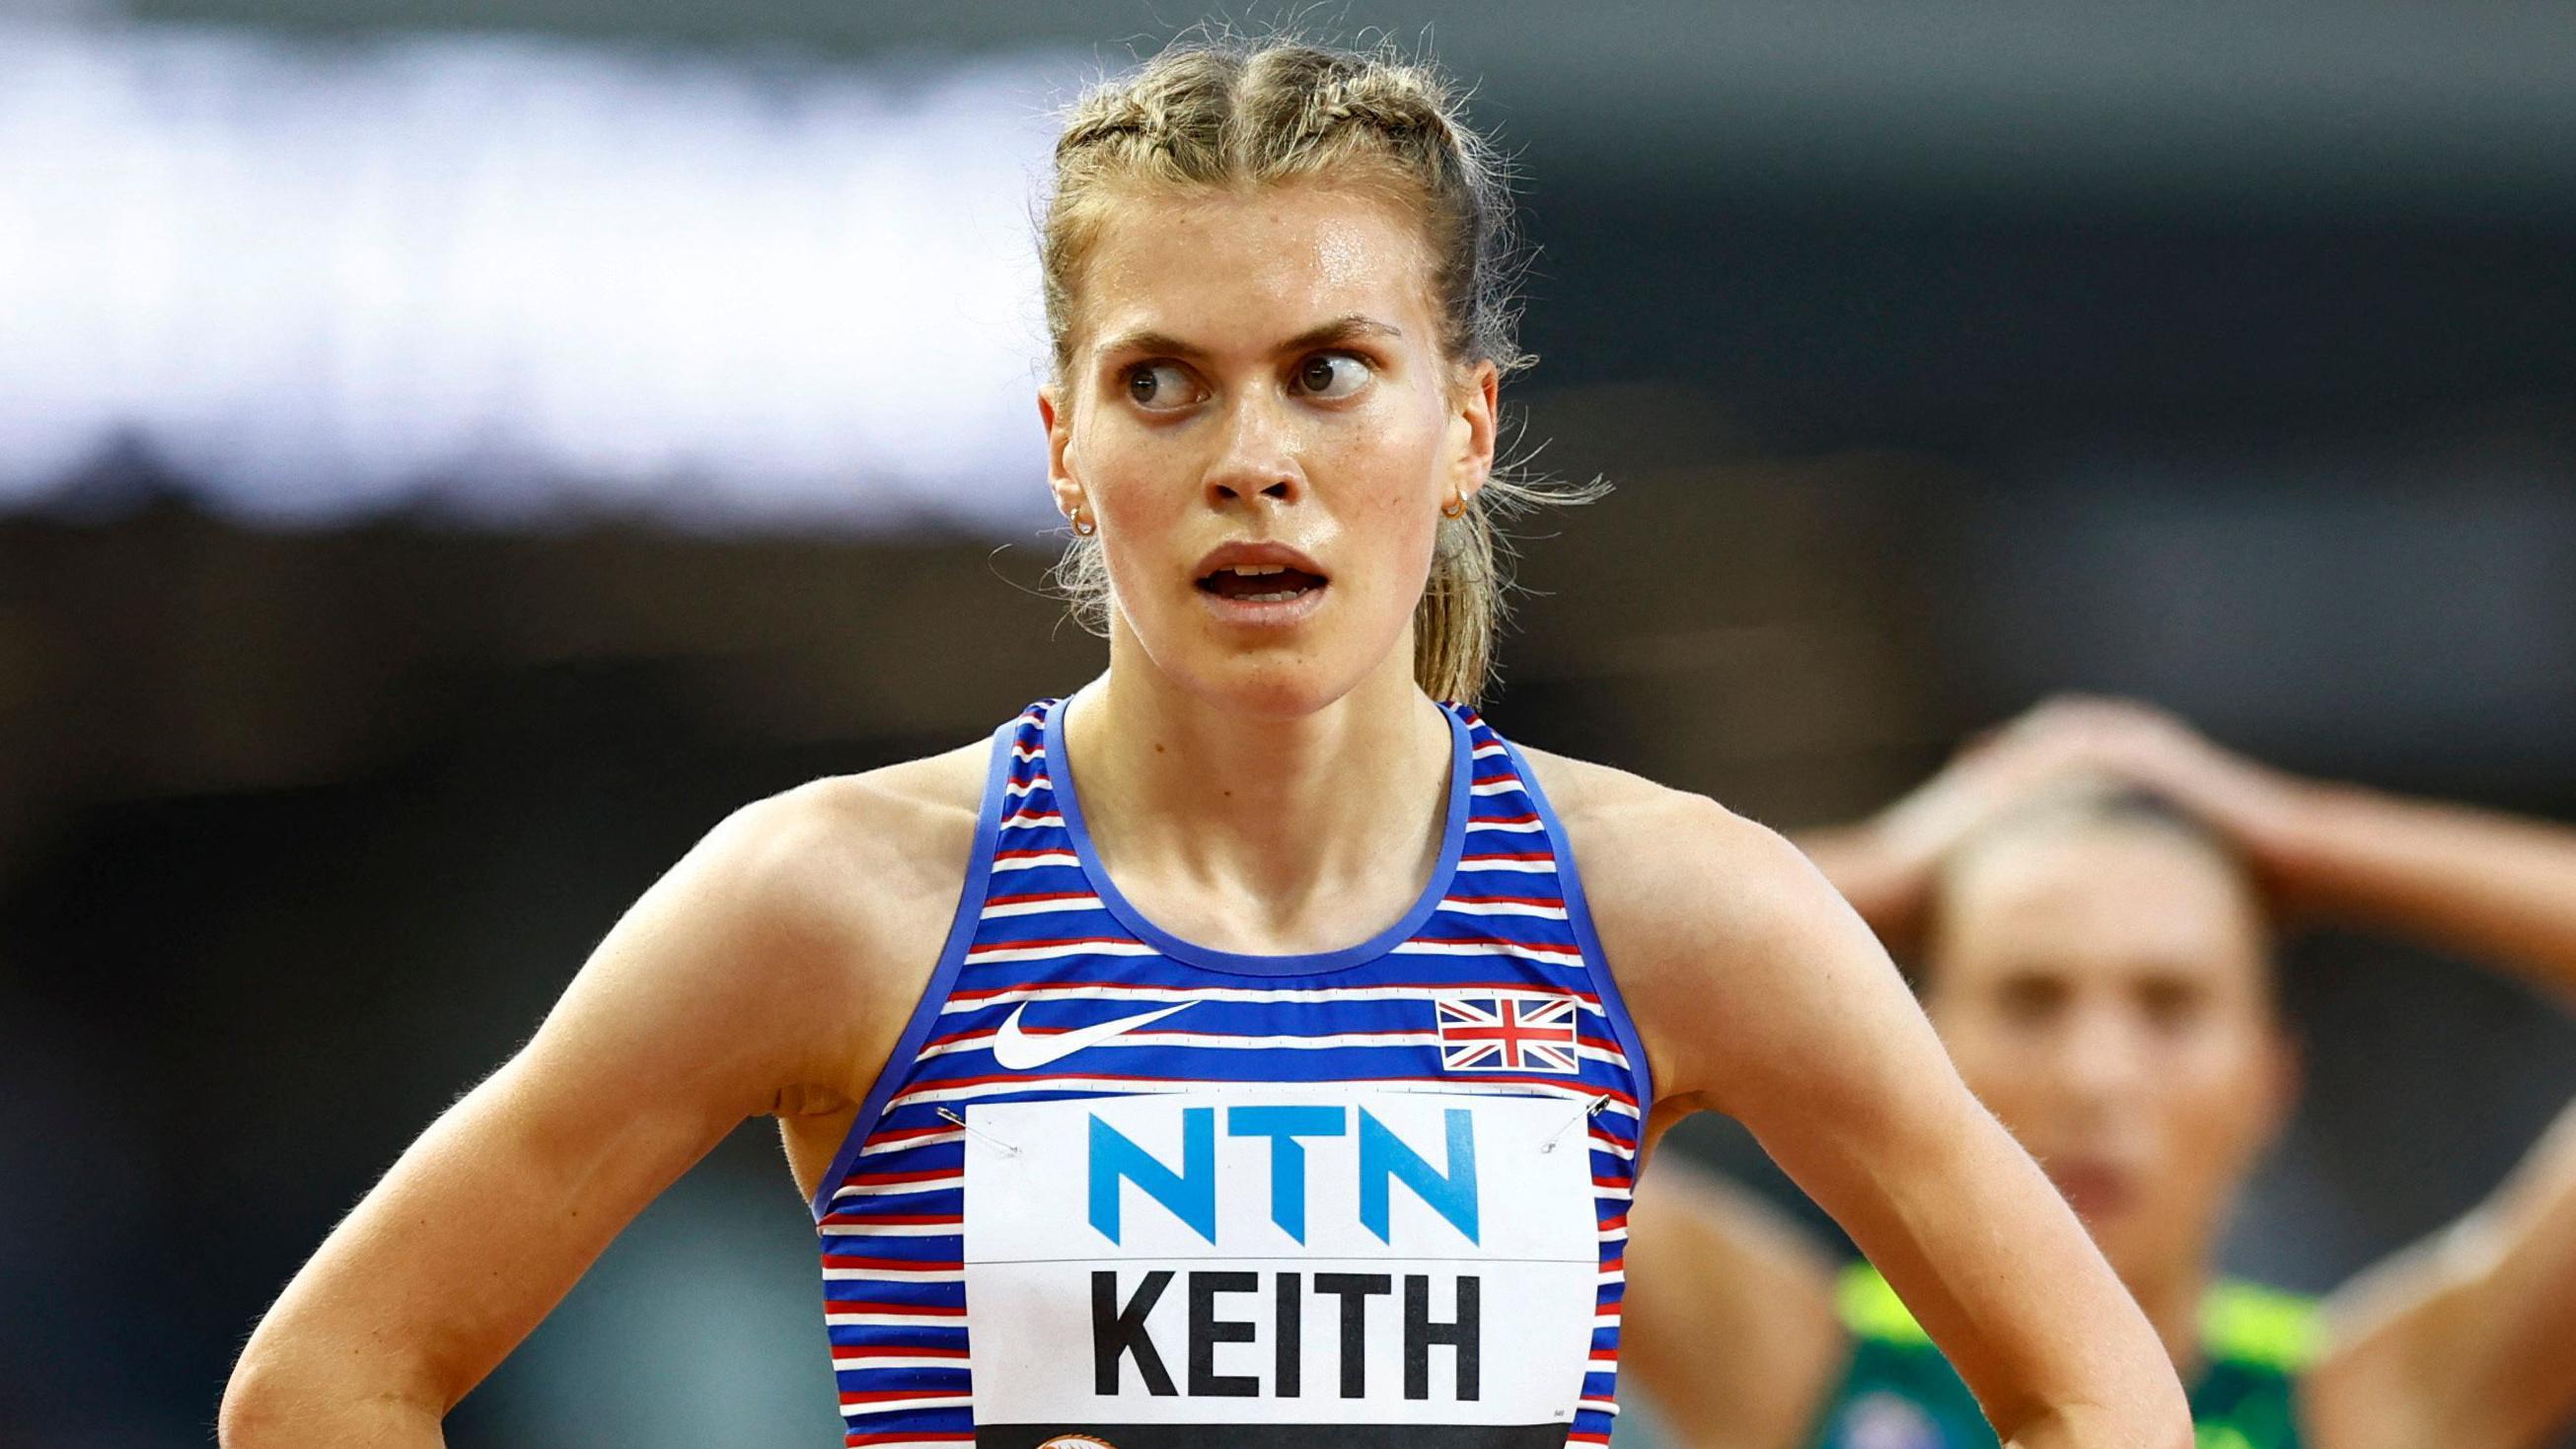 keith records second olympic qualifying time